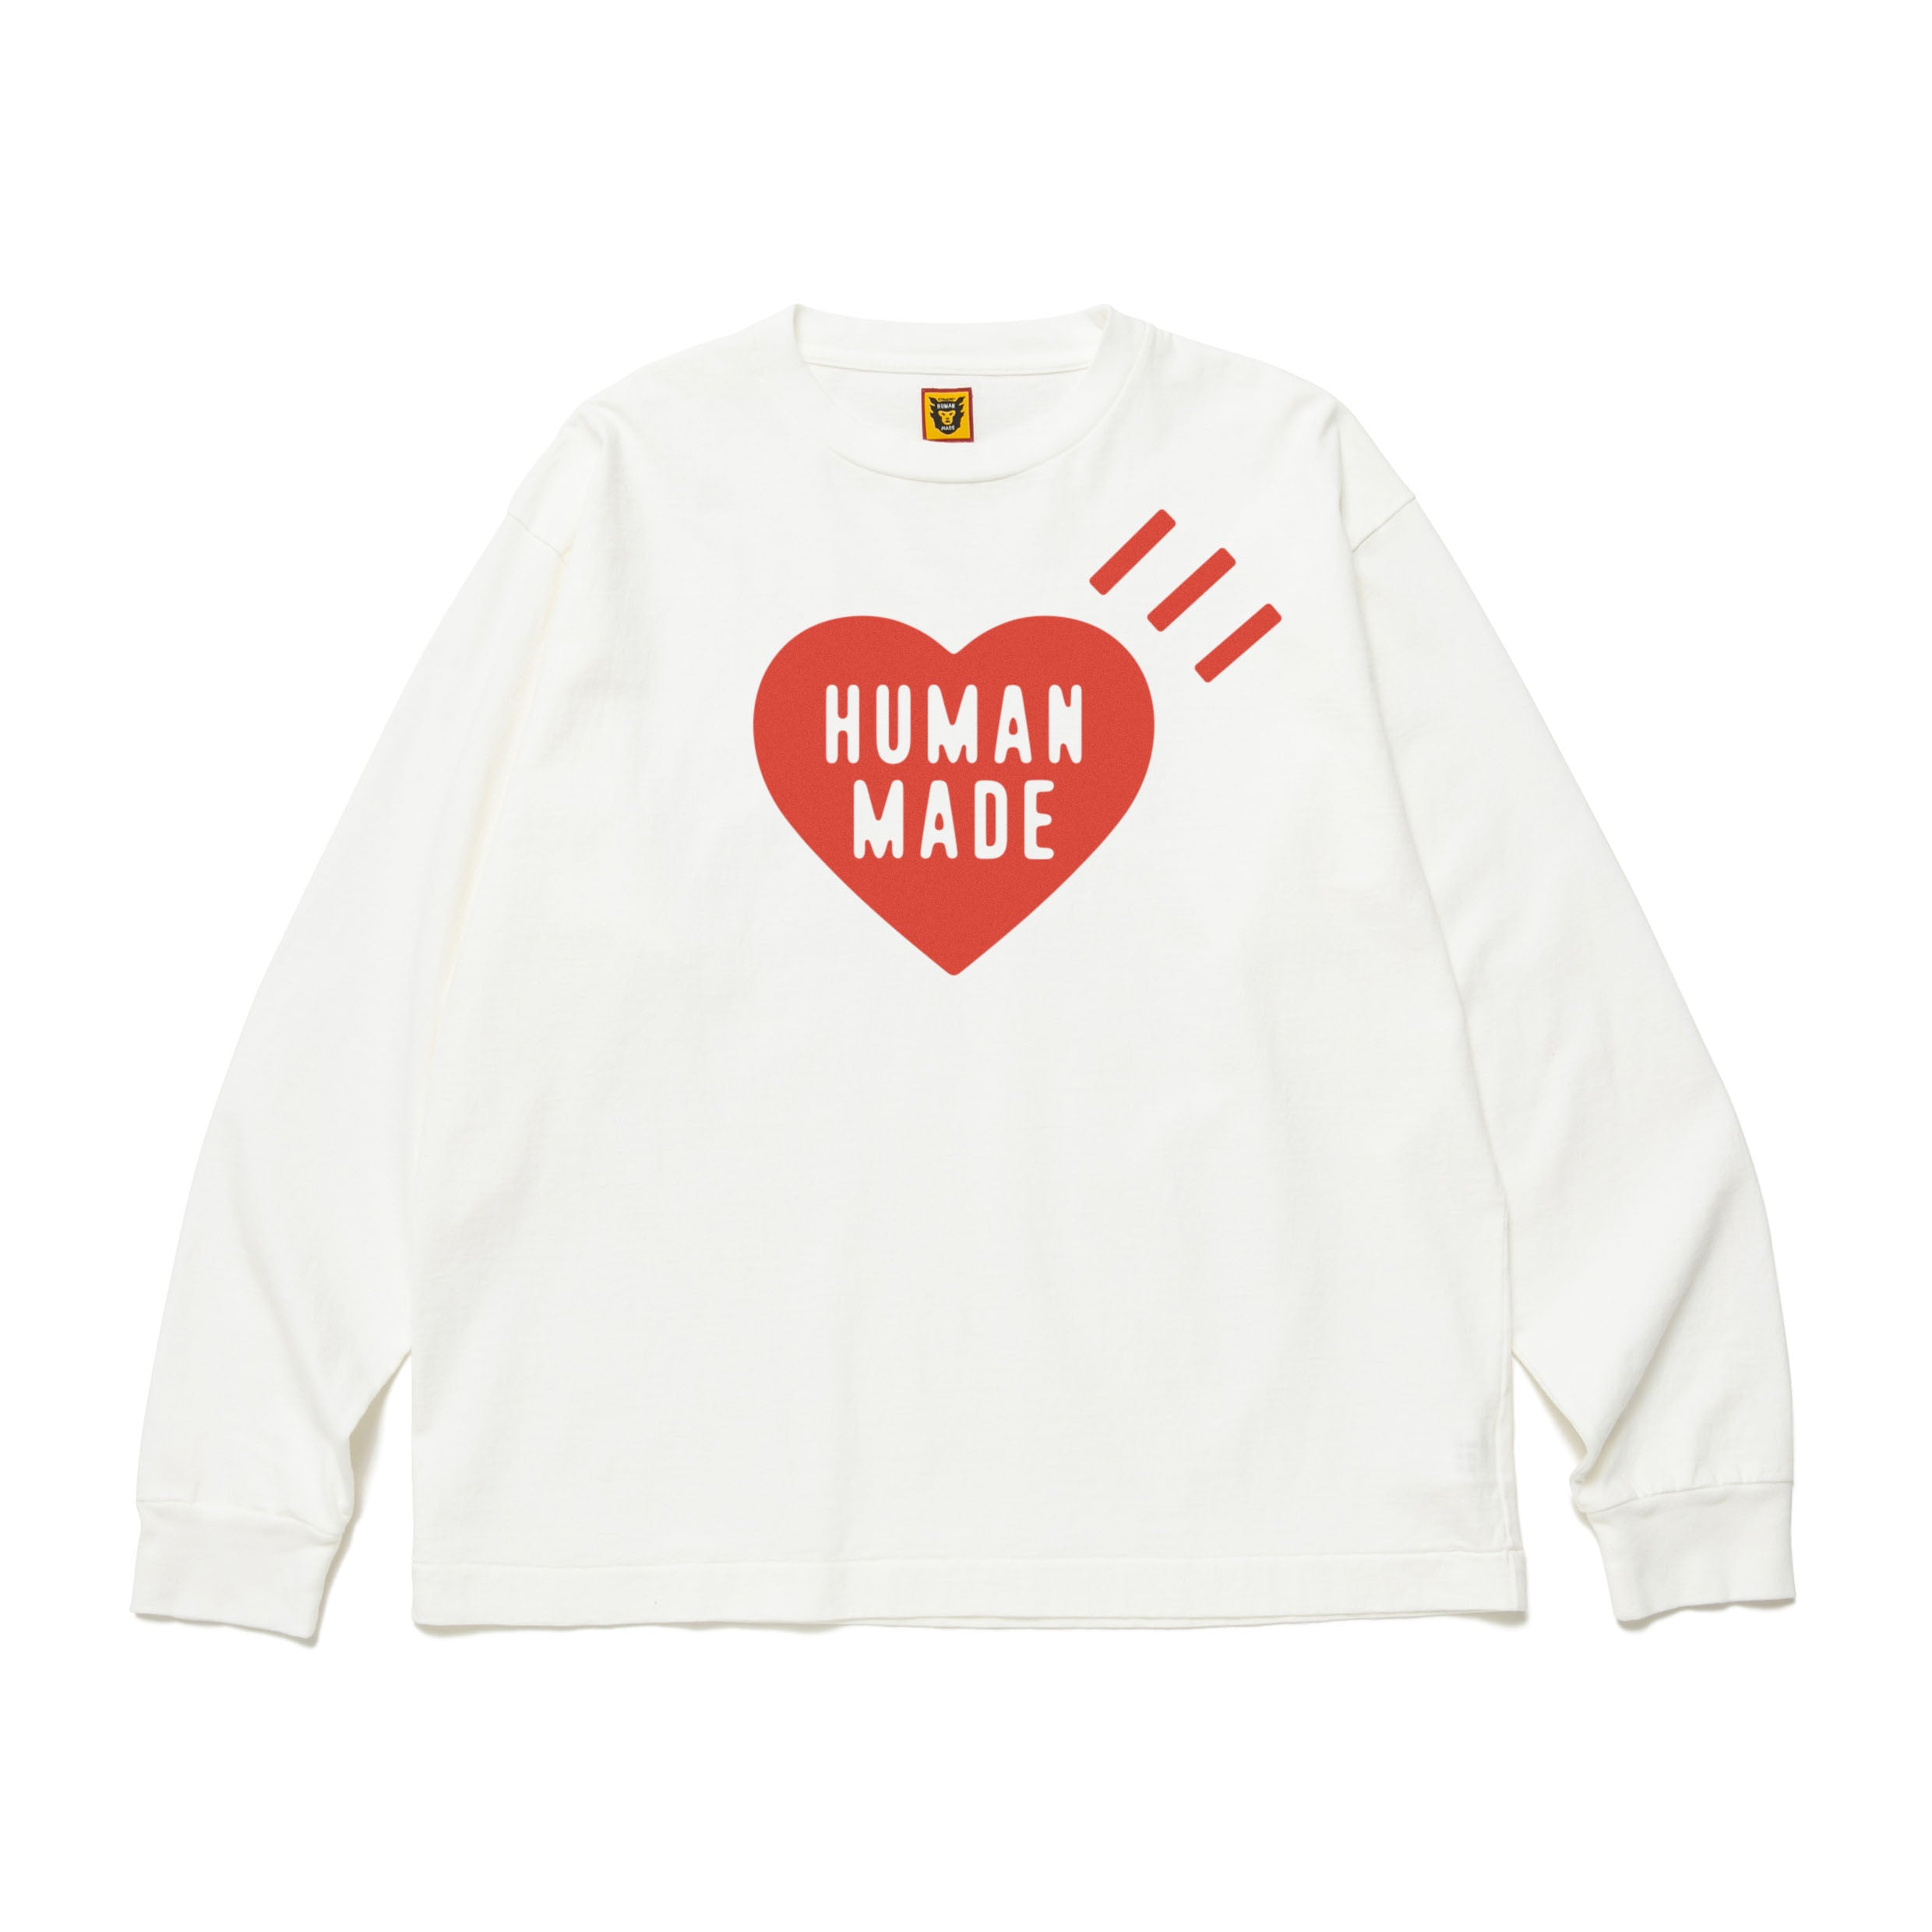 DAILY L/S T-SHIRT #261121 – HUMAN MADE ONLINE STORE